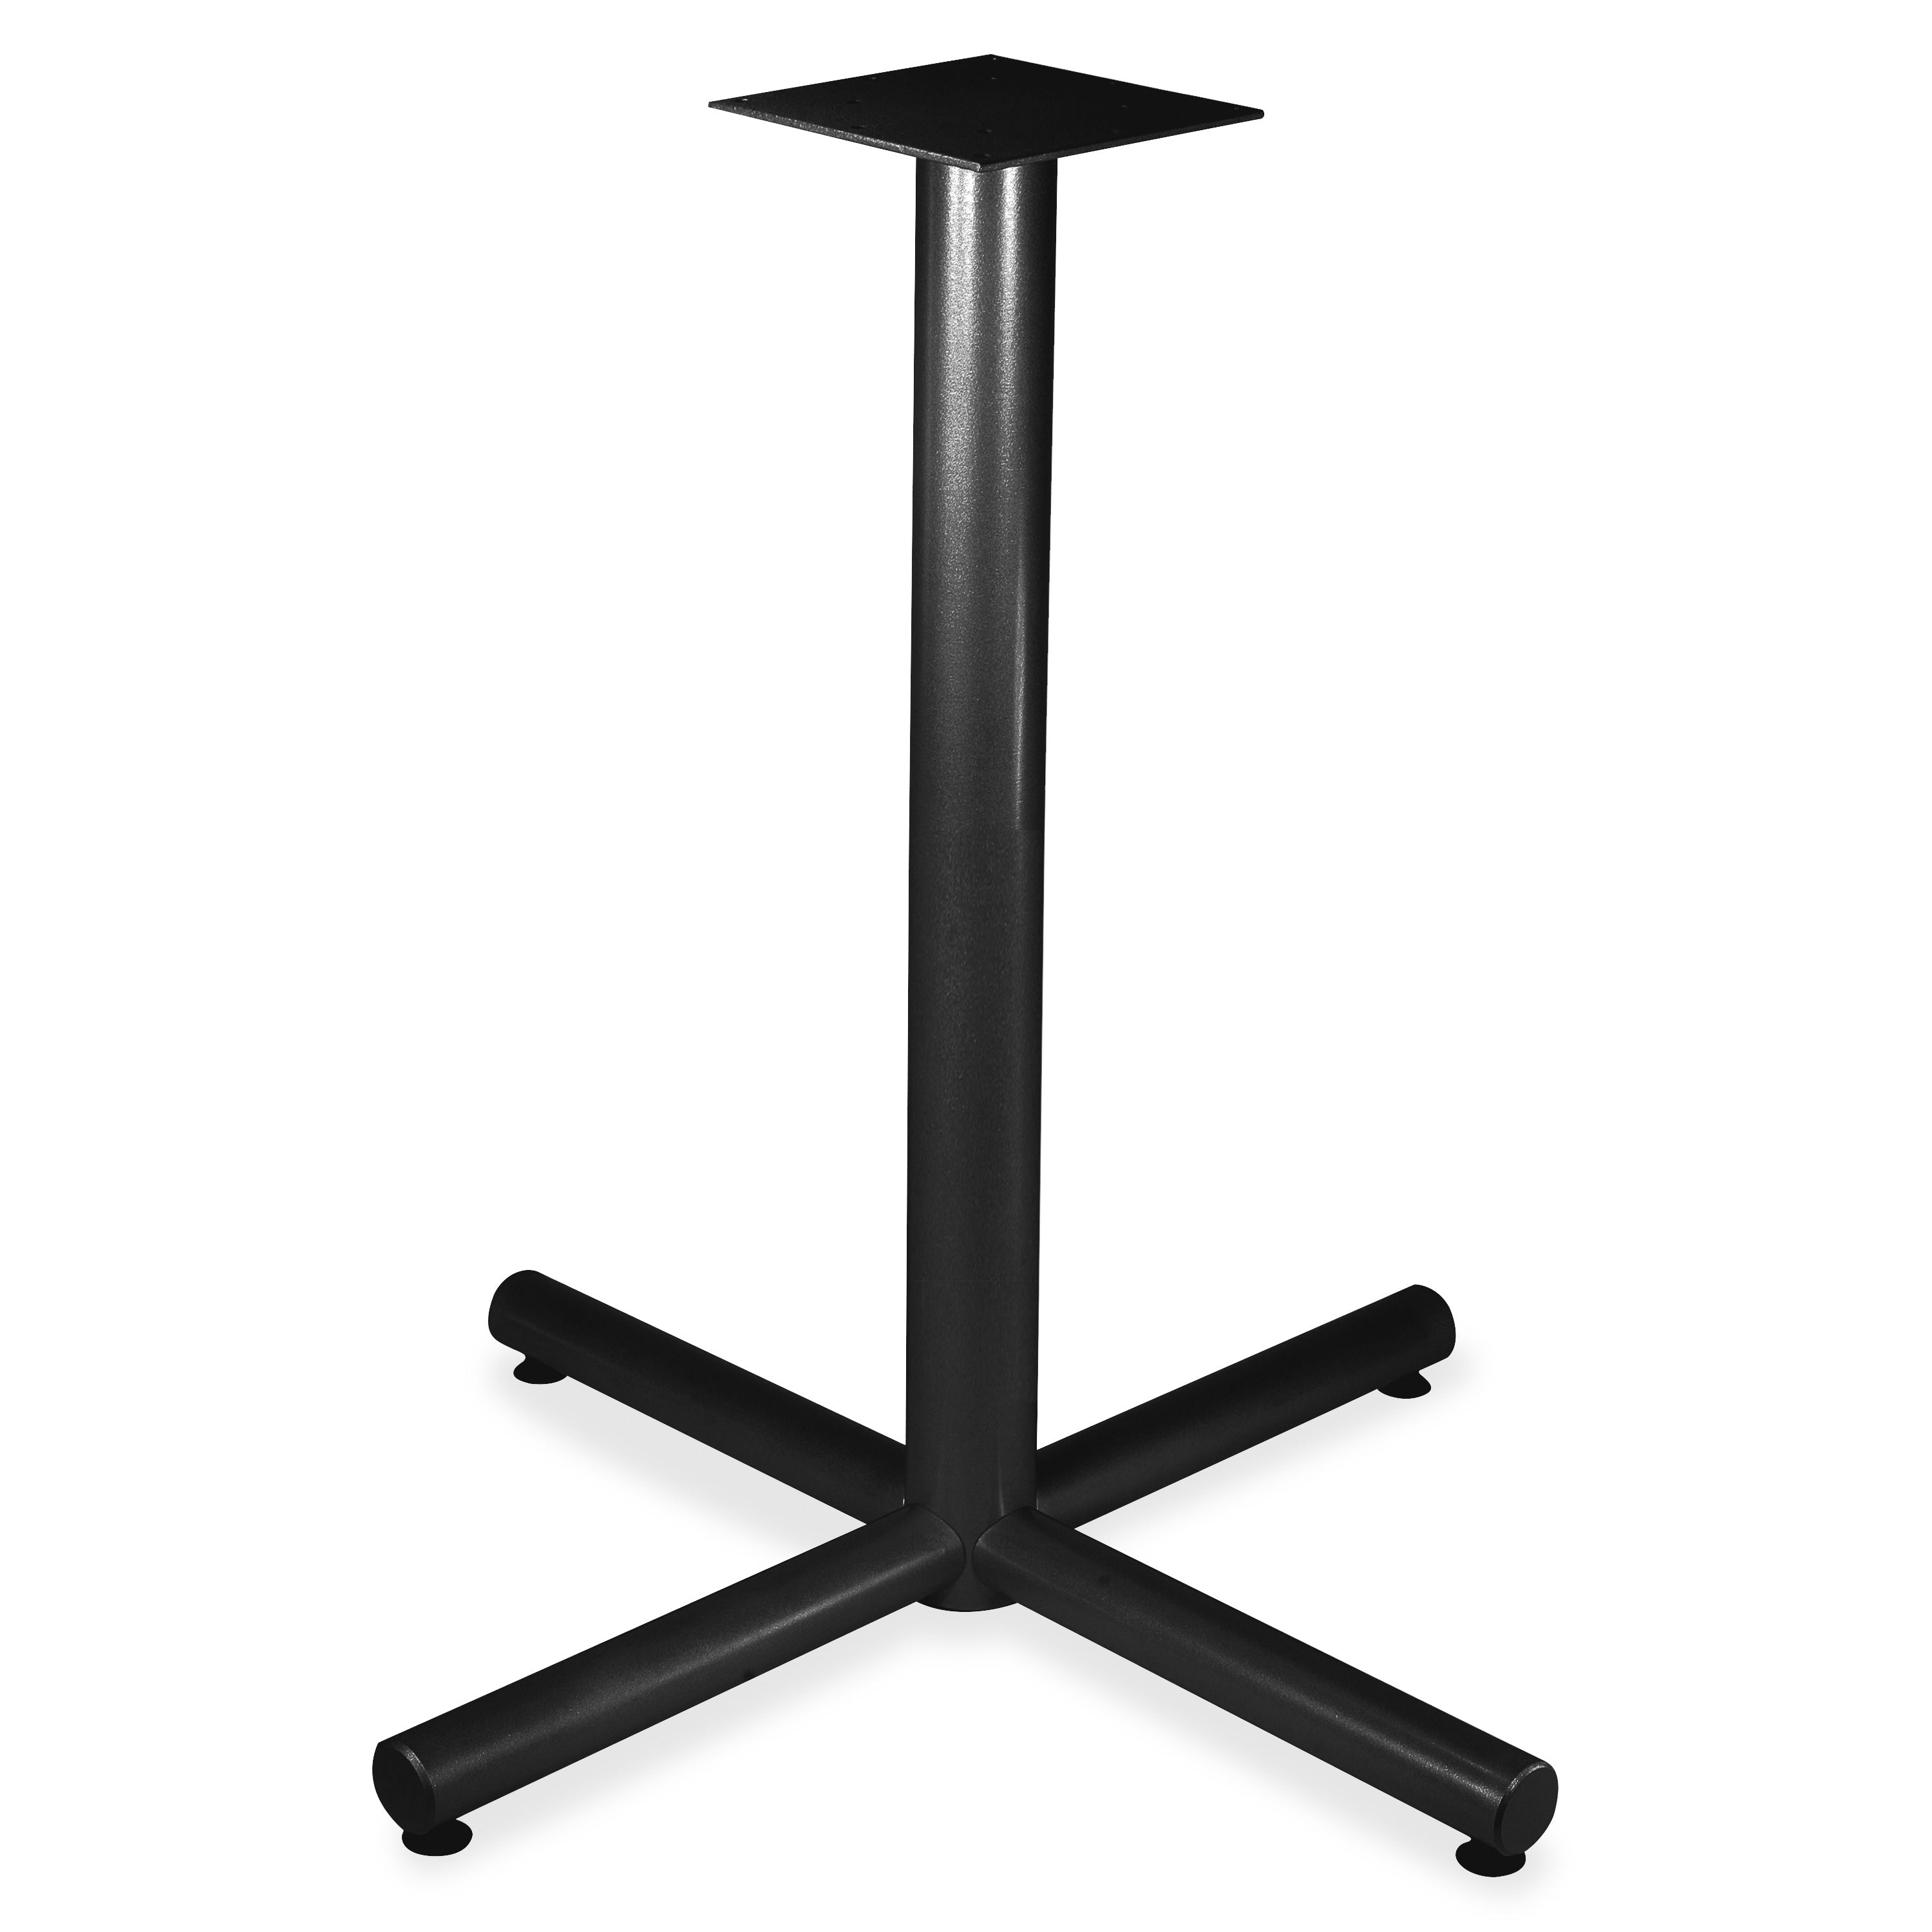 Lorell Hospitality 36" Bistro-Height Tabletop X-leg Base - Black X-shaped Base - 40.75" Height x 32" Width - Assembly Required - 1 Each